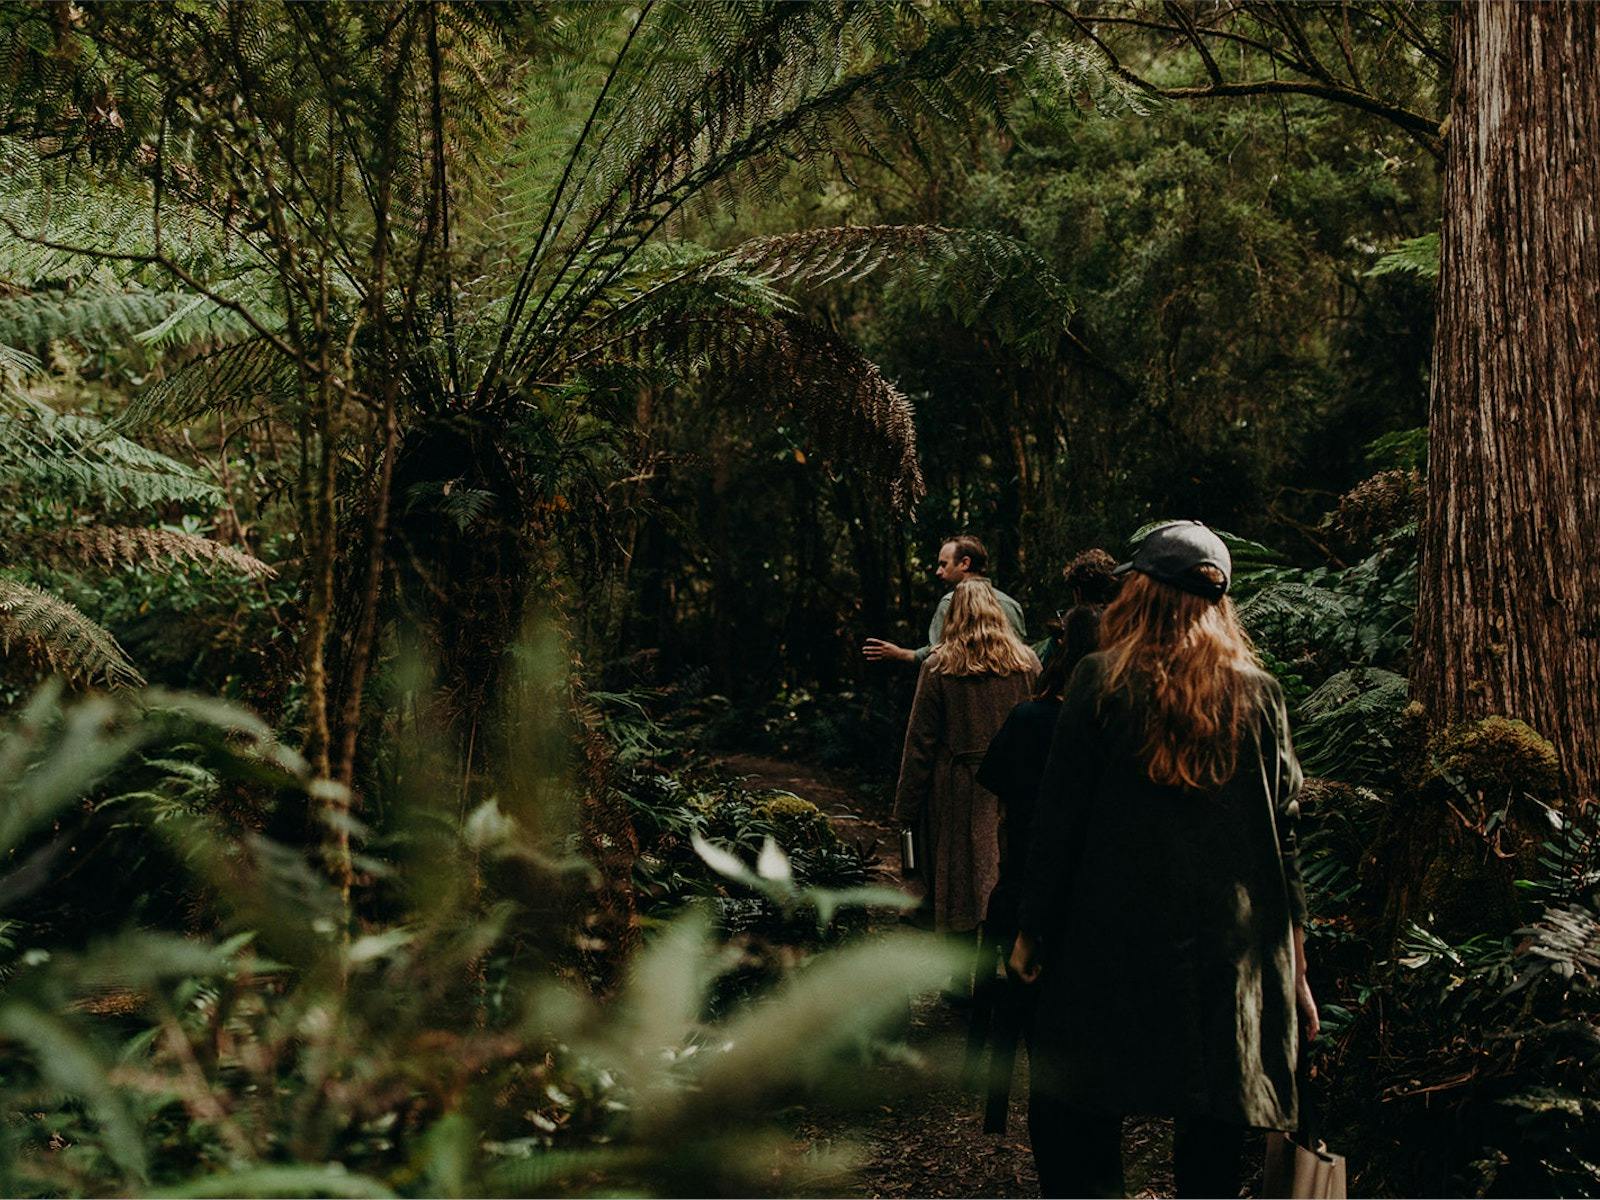 Guide leads group through a rainforest surrounded by trees and ferns